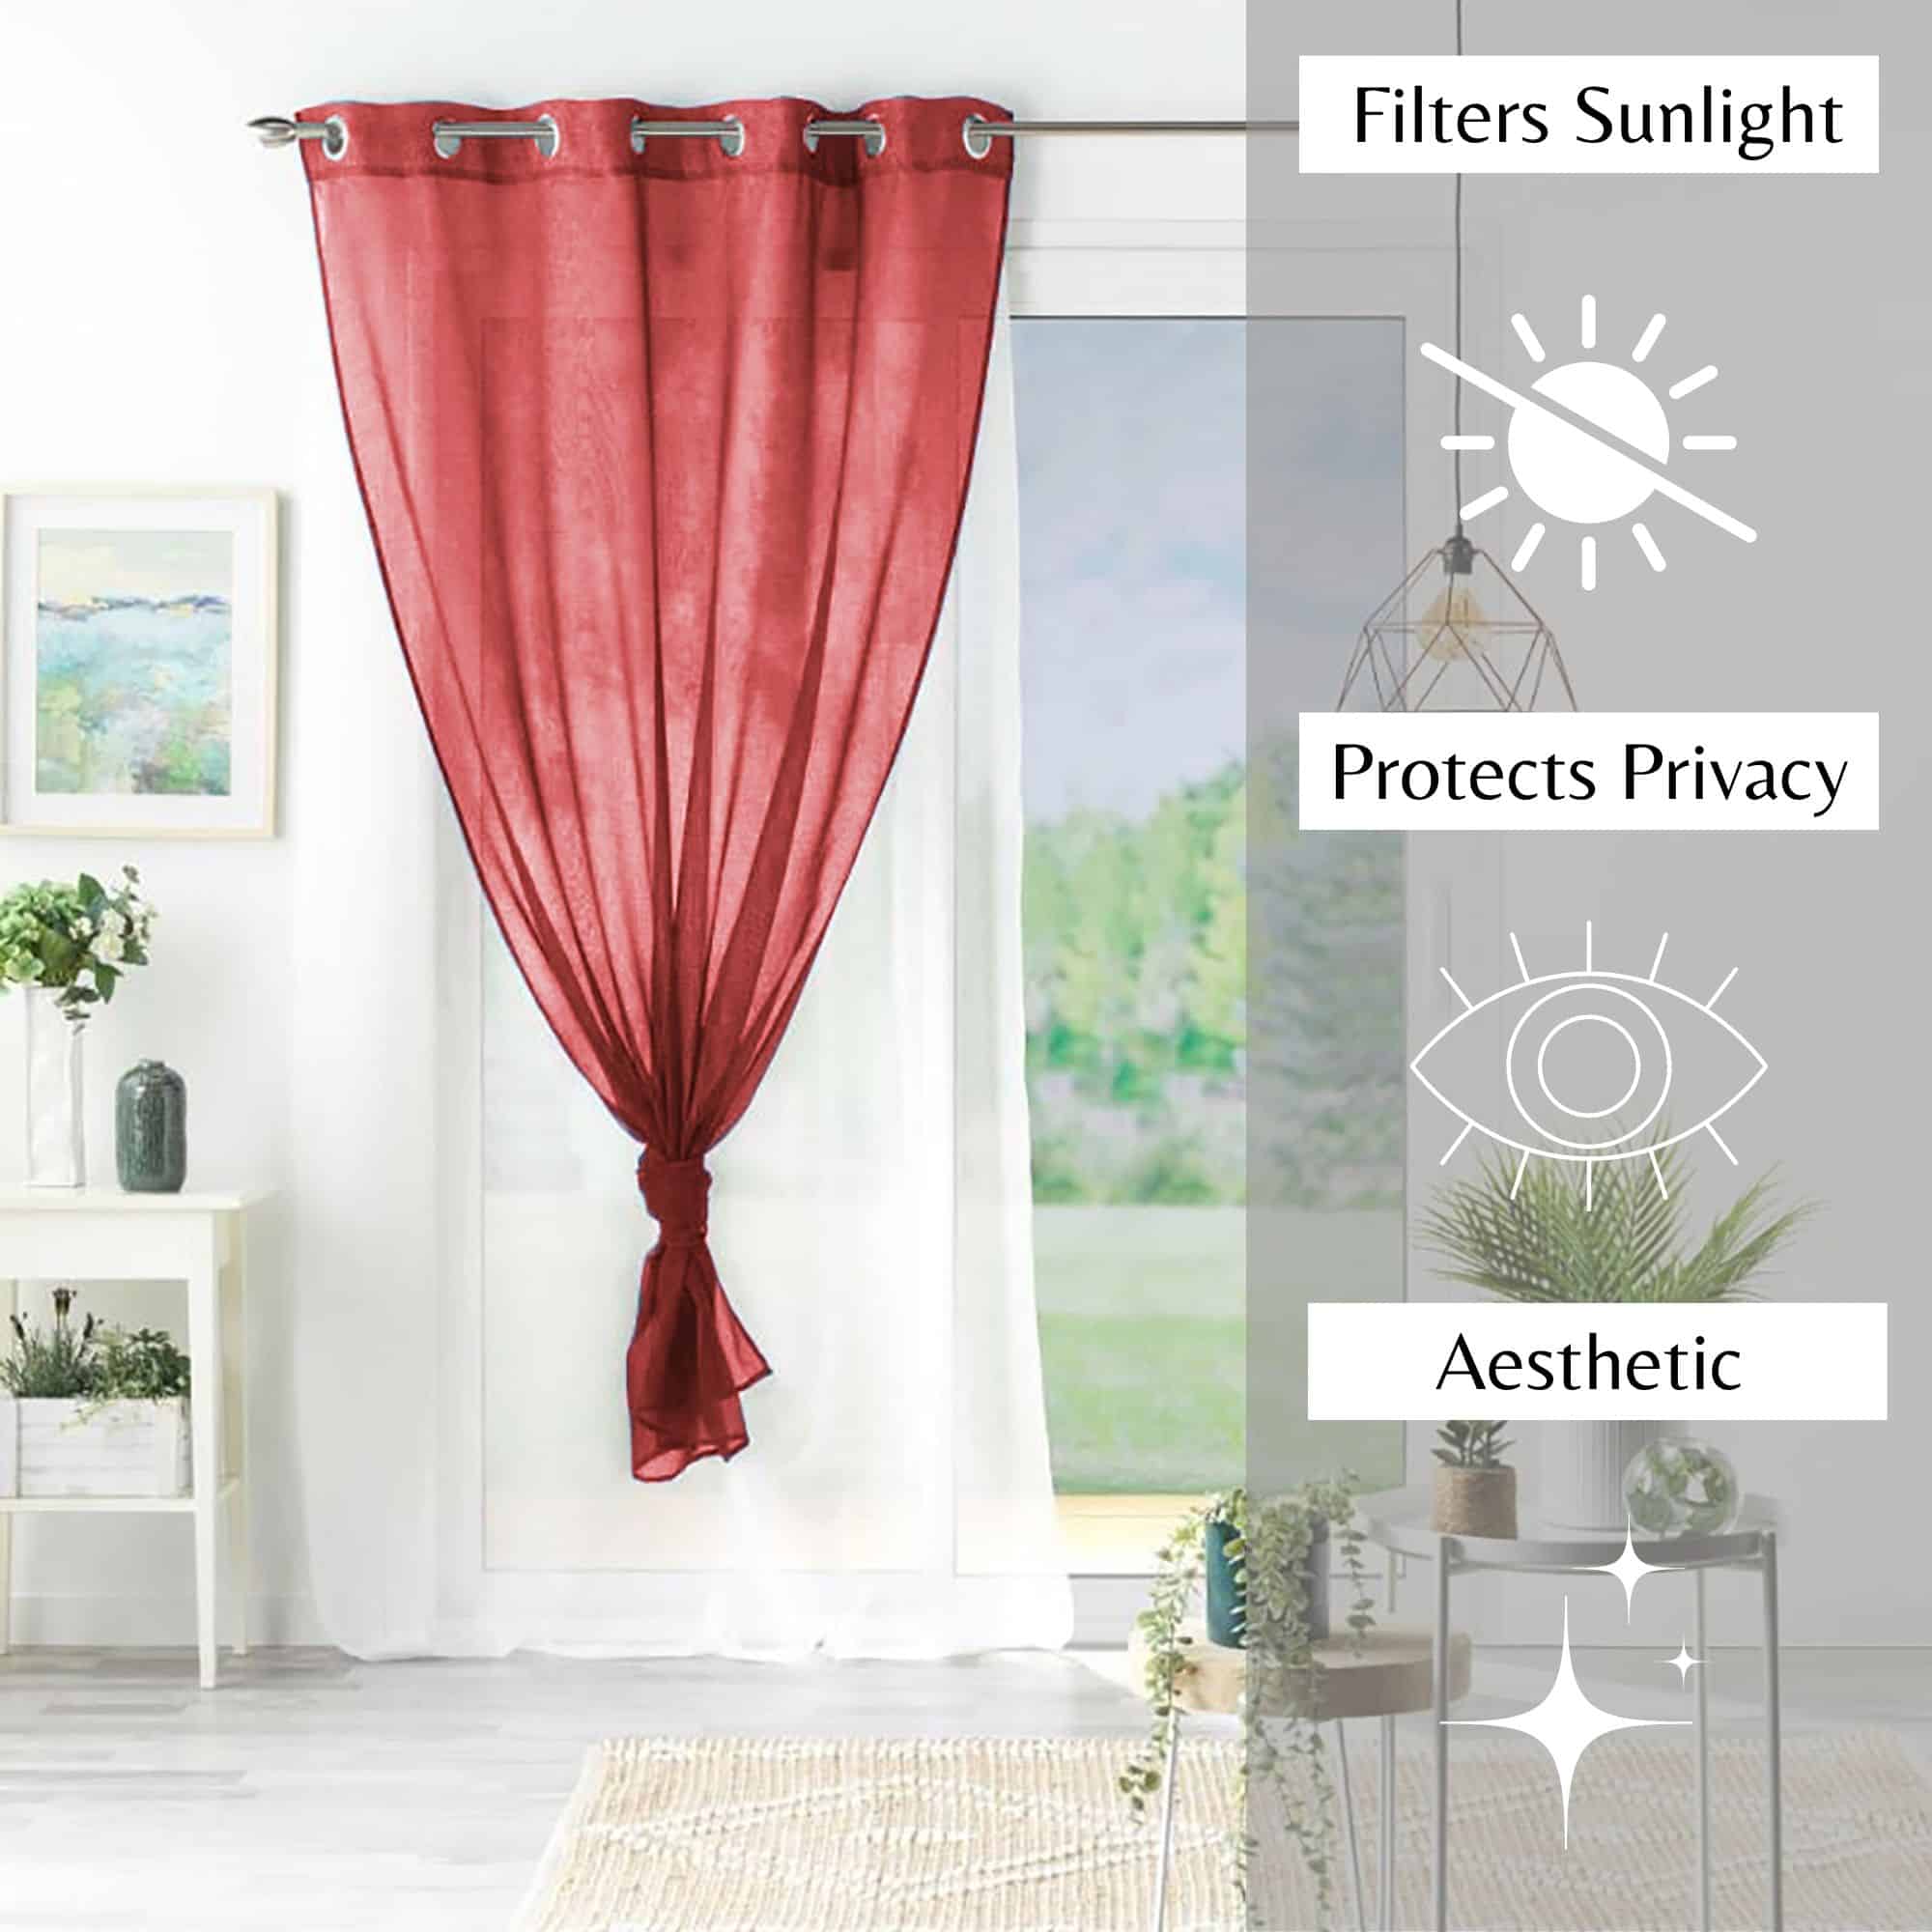 filters sunlight protects privacy aesthetic red and white voile curtain panel for interior design